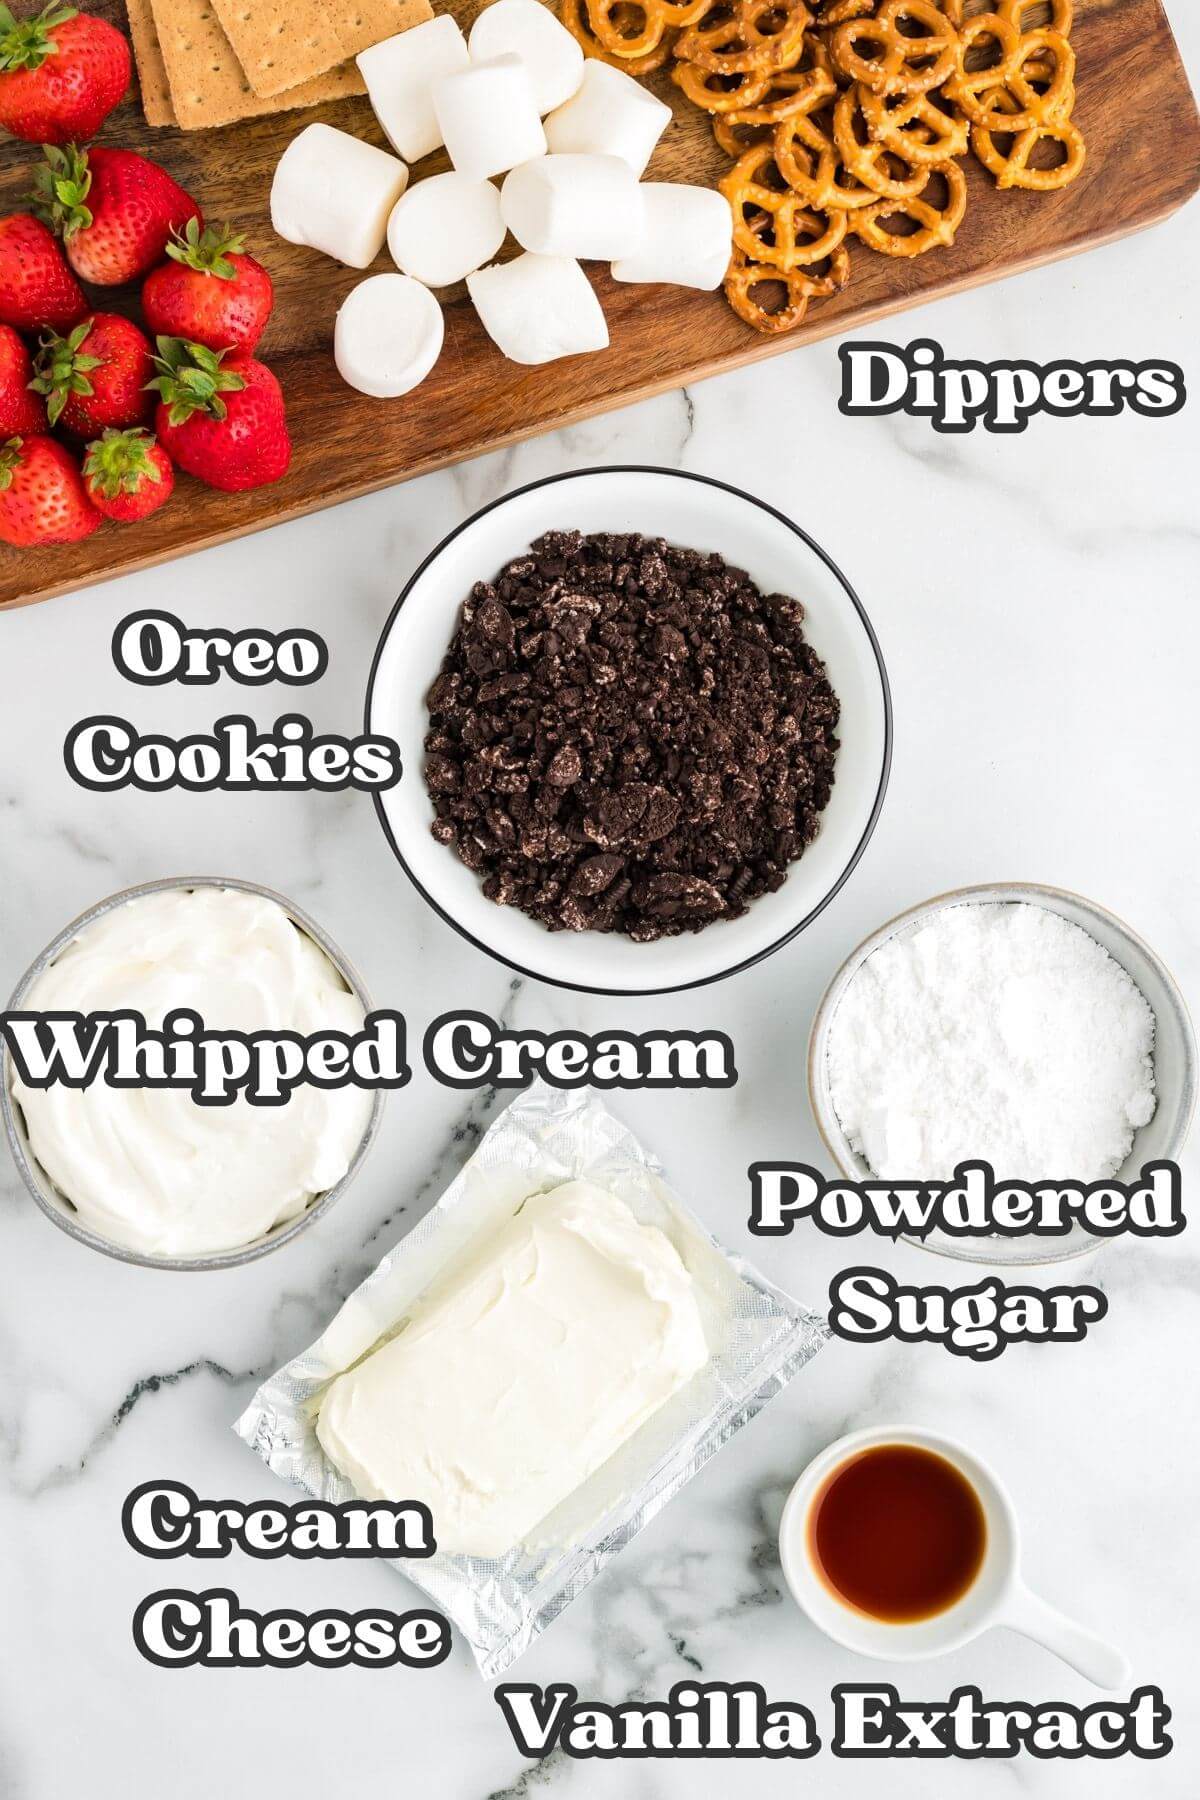 Labeled ingredients for oreo fluff.